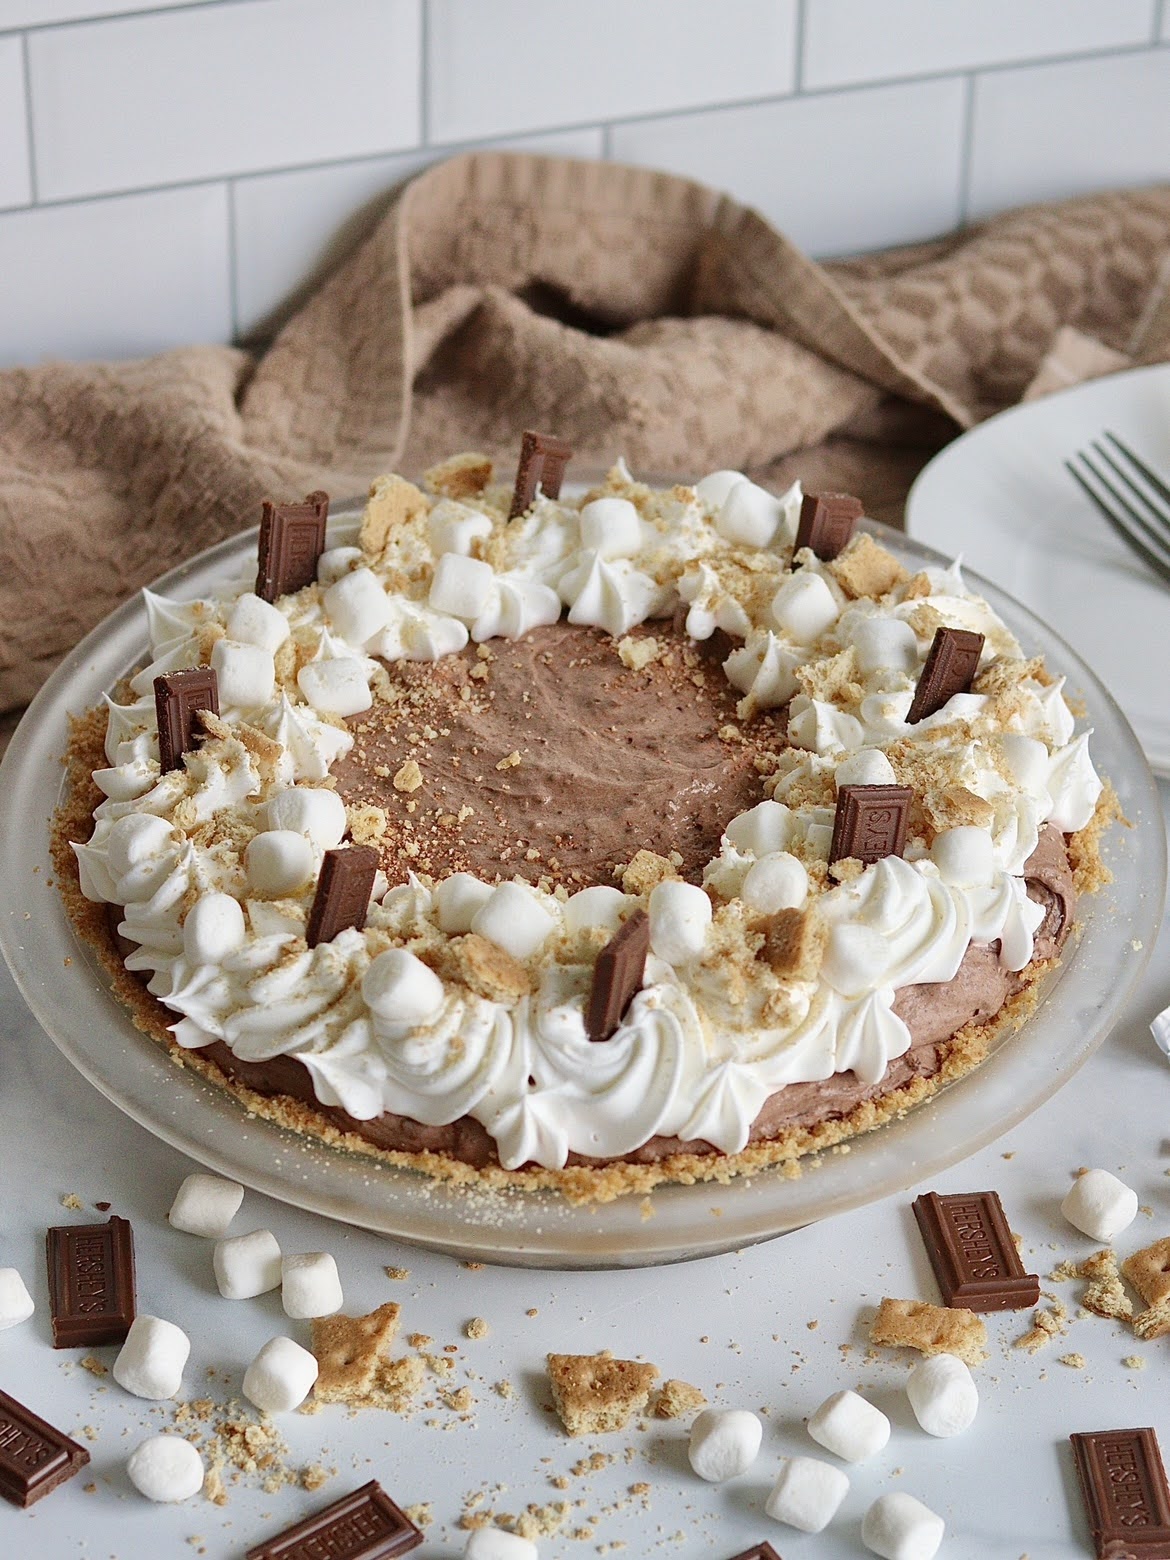 A full chocolate cream s'mores pie, decorated with Hershey's pieces, graham crackers and marshmallows.